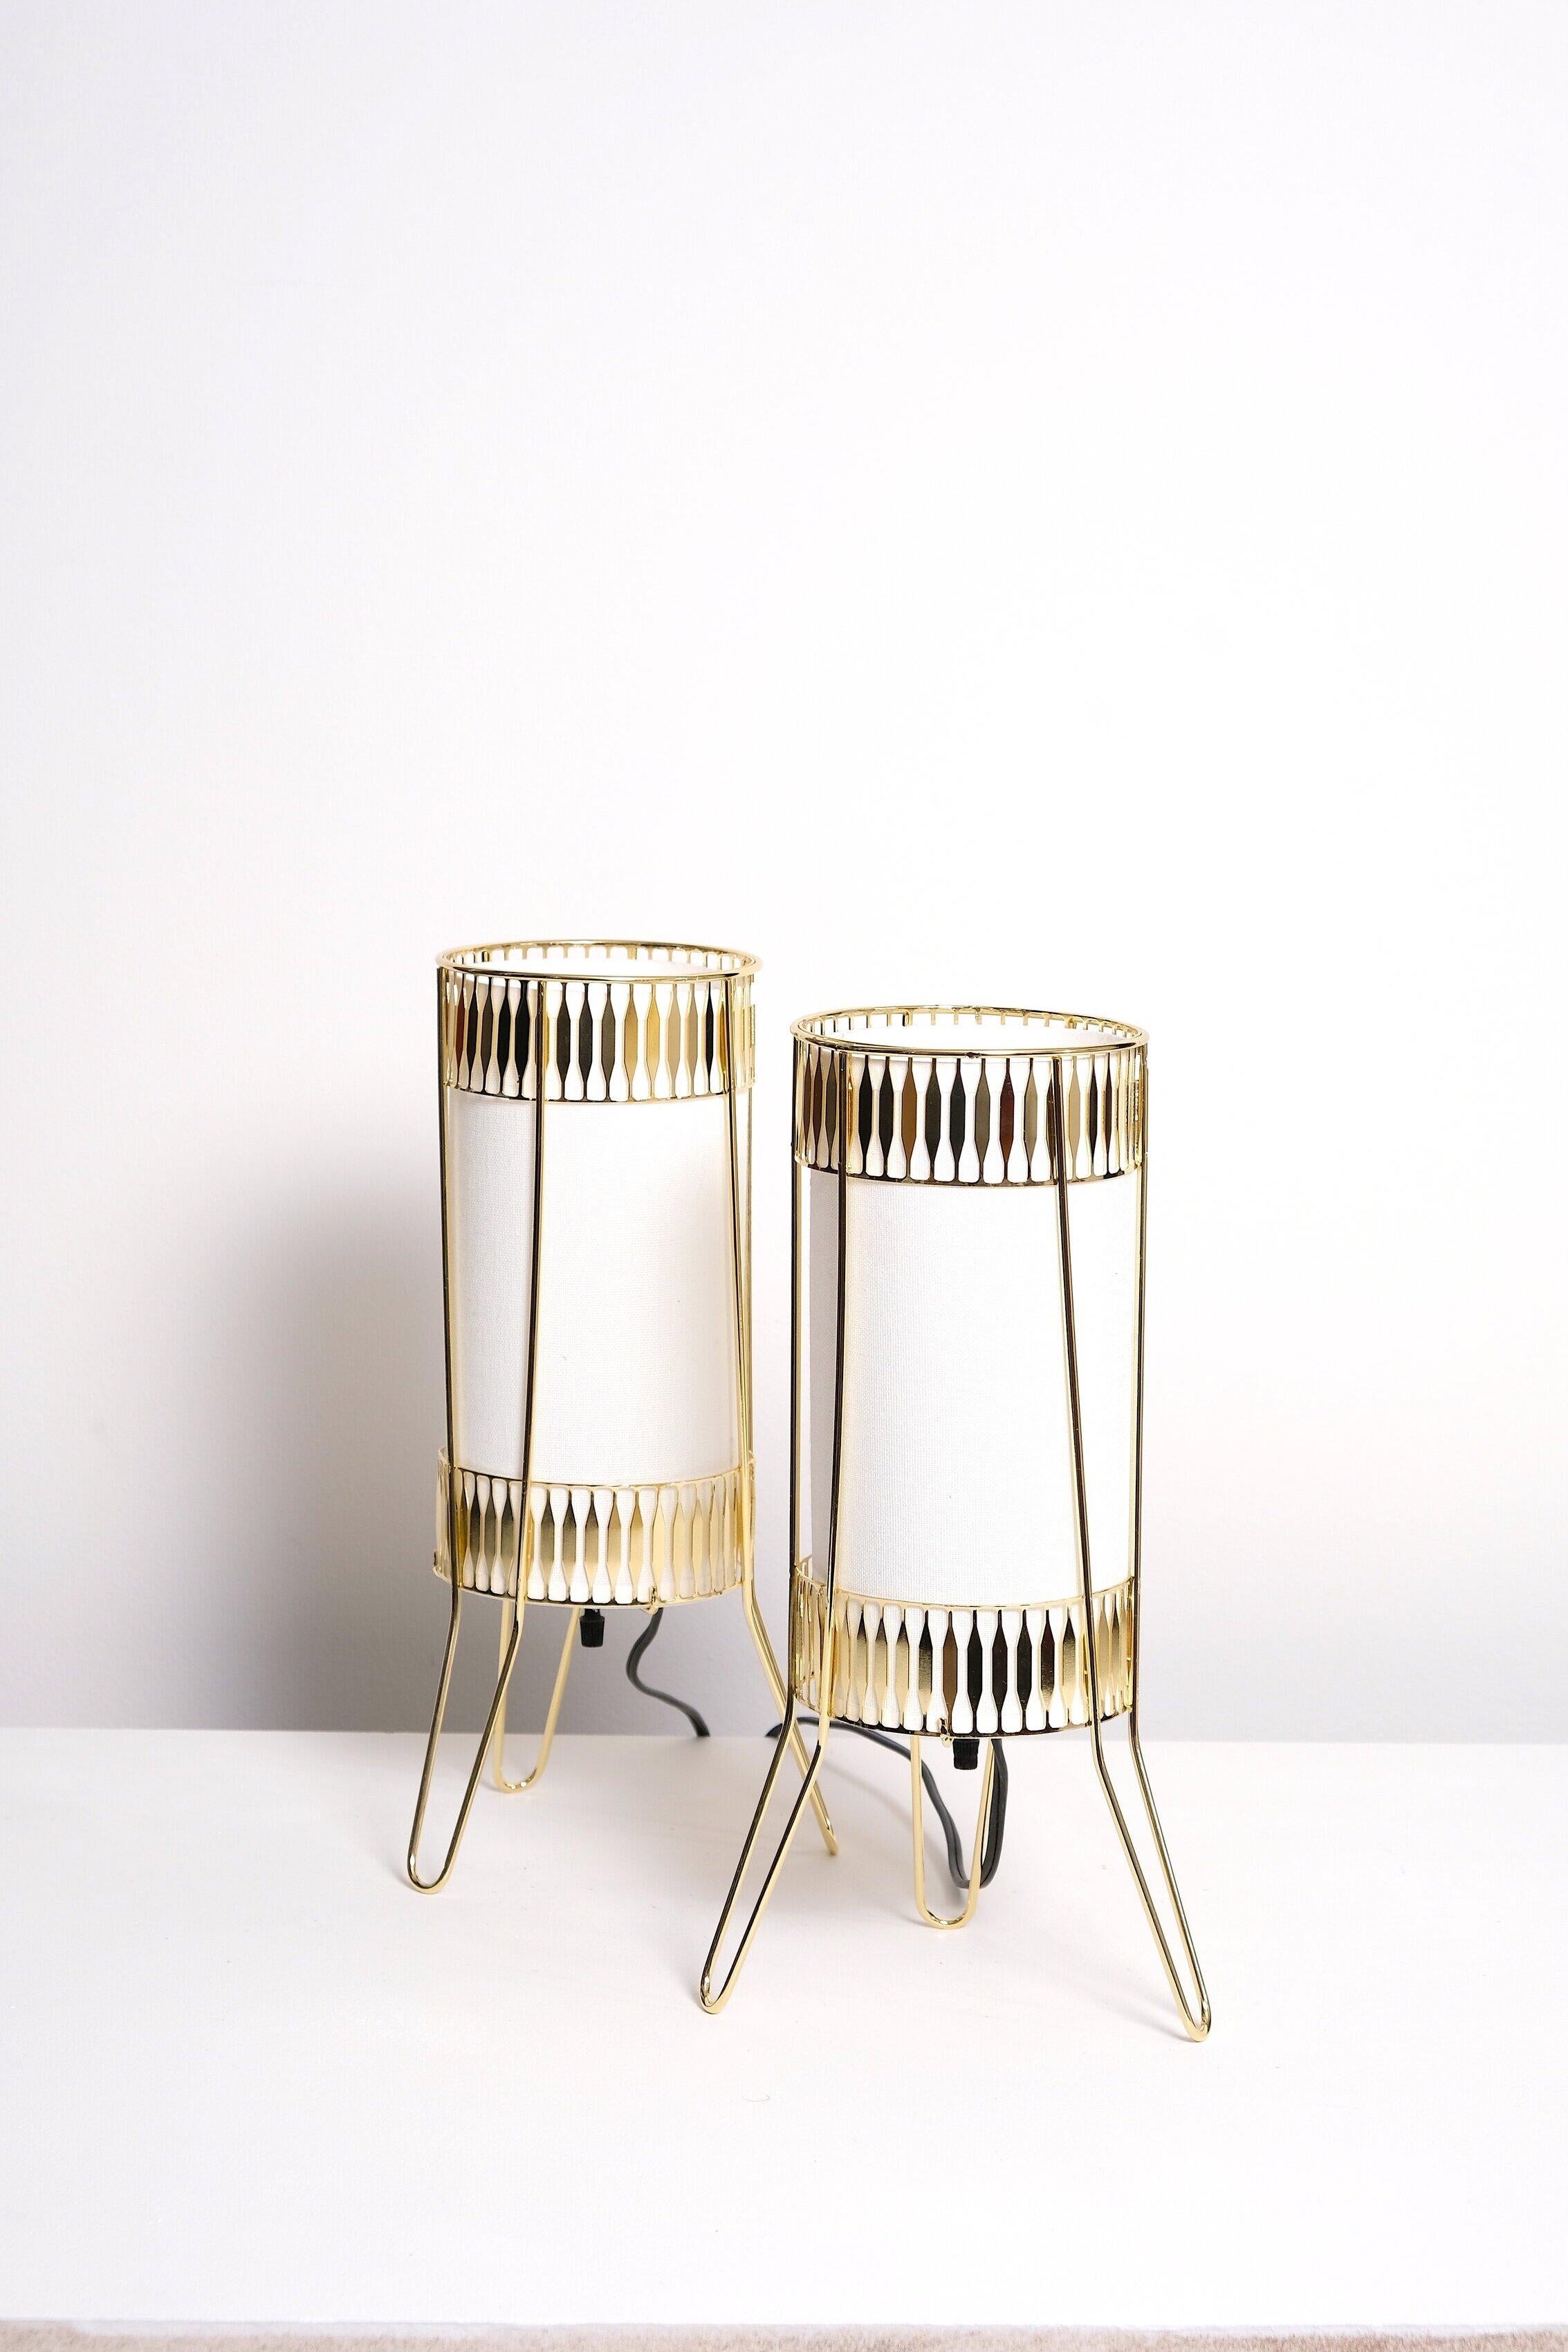 Brass plated steel hairpin legs and frame, linen shades. 40 watt E-26 Edison medium base incandescent bulb recommended or higher if LED/CFL.

Verified original E-26 Edison medium base switch socket and 18/2 black plastic cord with non-polarized